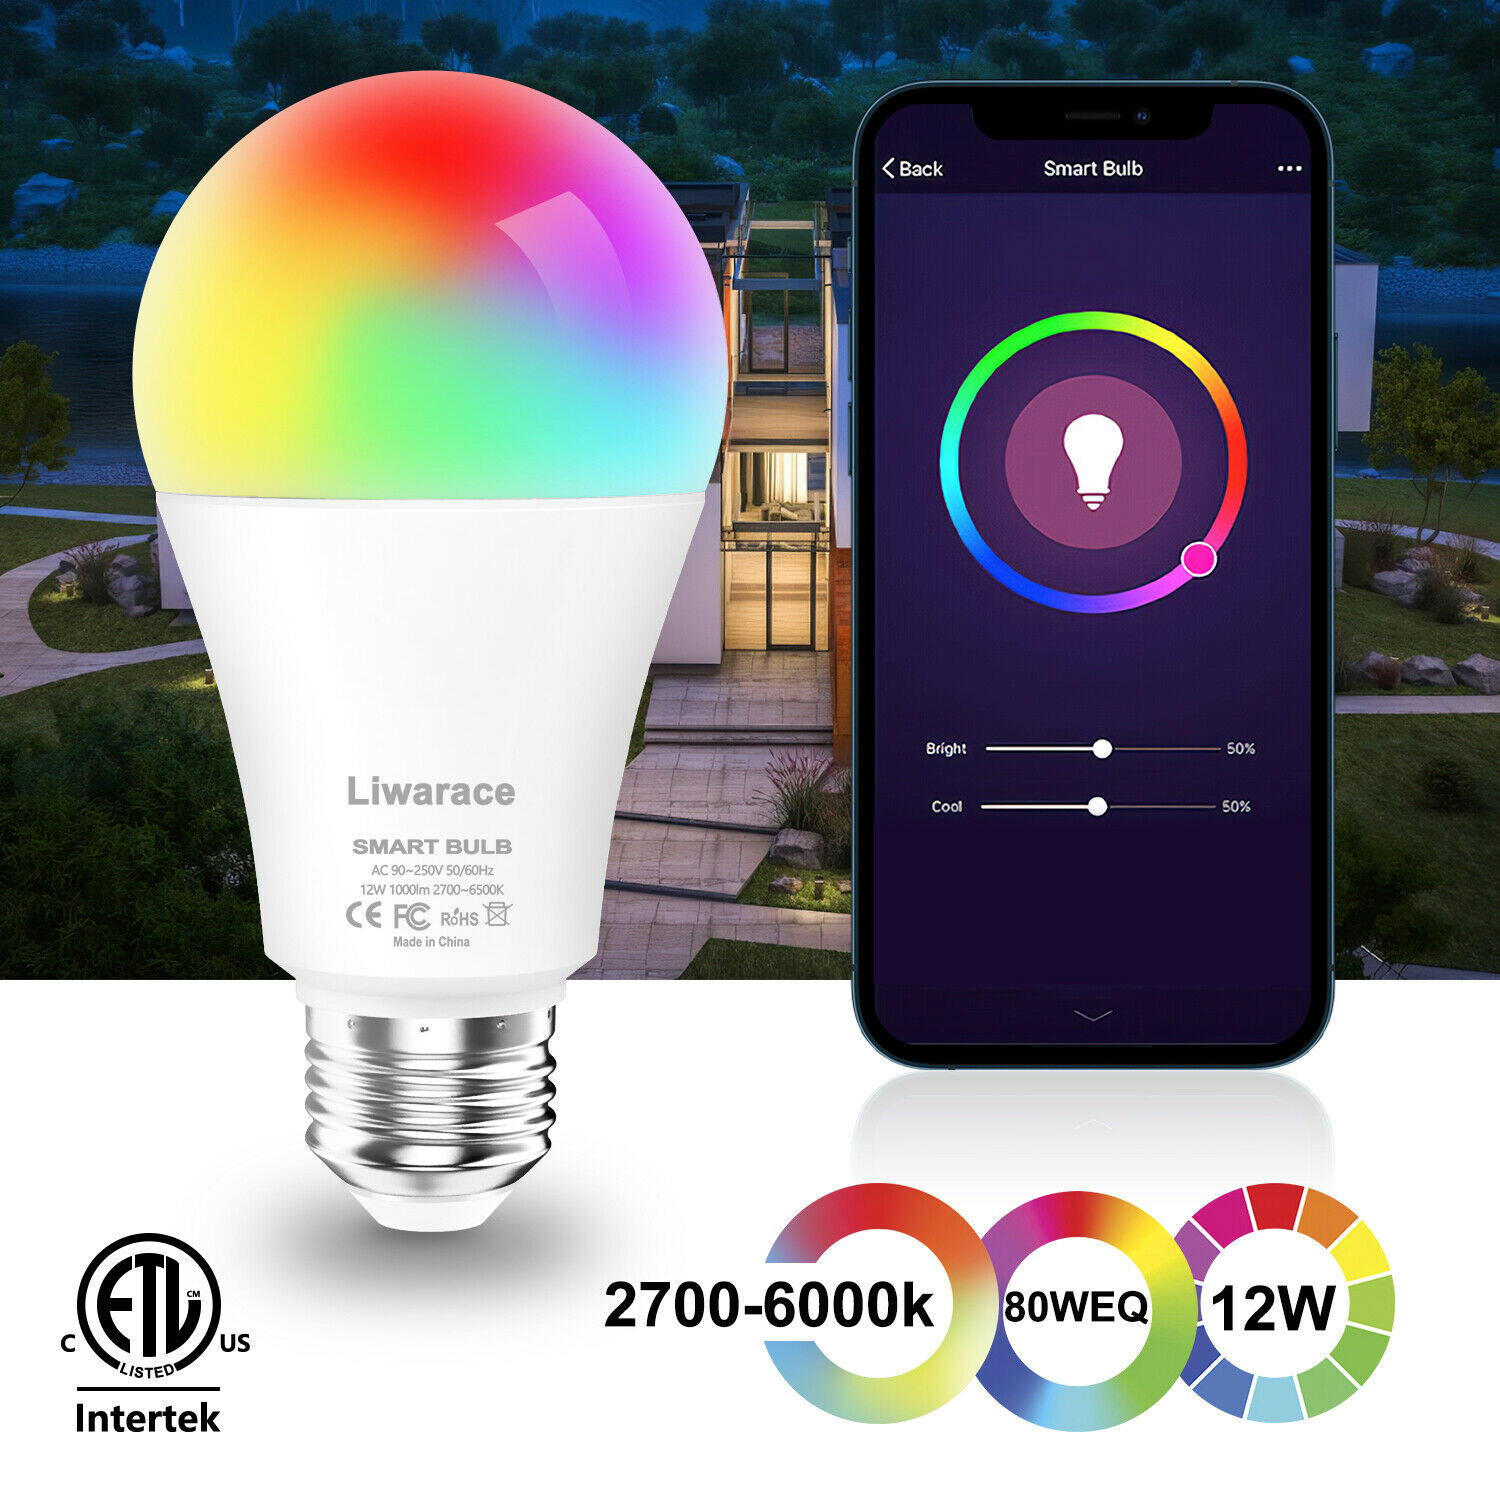 Jeeo Smart WiFi Light Bulb LED Warm White Dimmable Bulb Compatible with Alexa Jeeo App Remote Control 2 Pack Google Home Assistant IFTTT A19 800 Lumens/60W Equivalent No Hub Required 